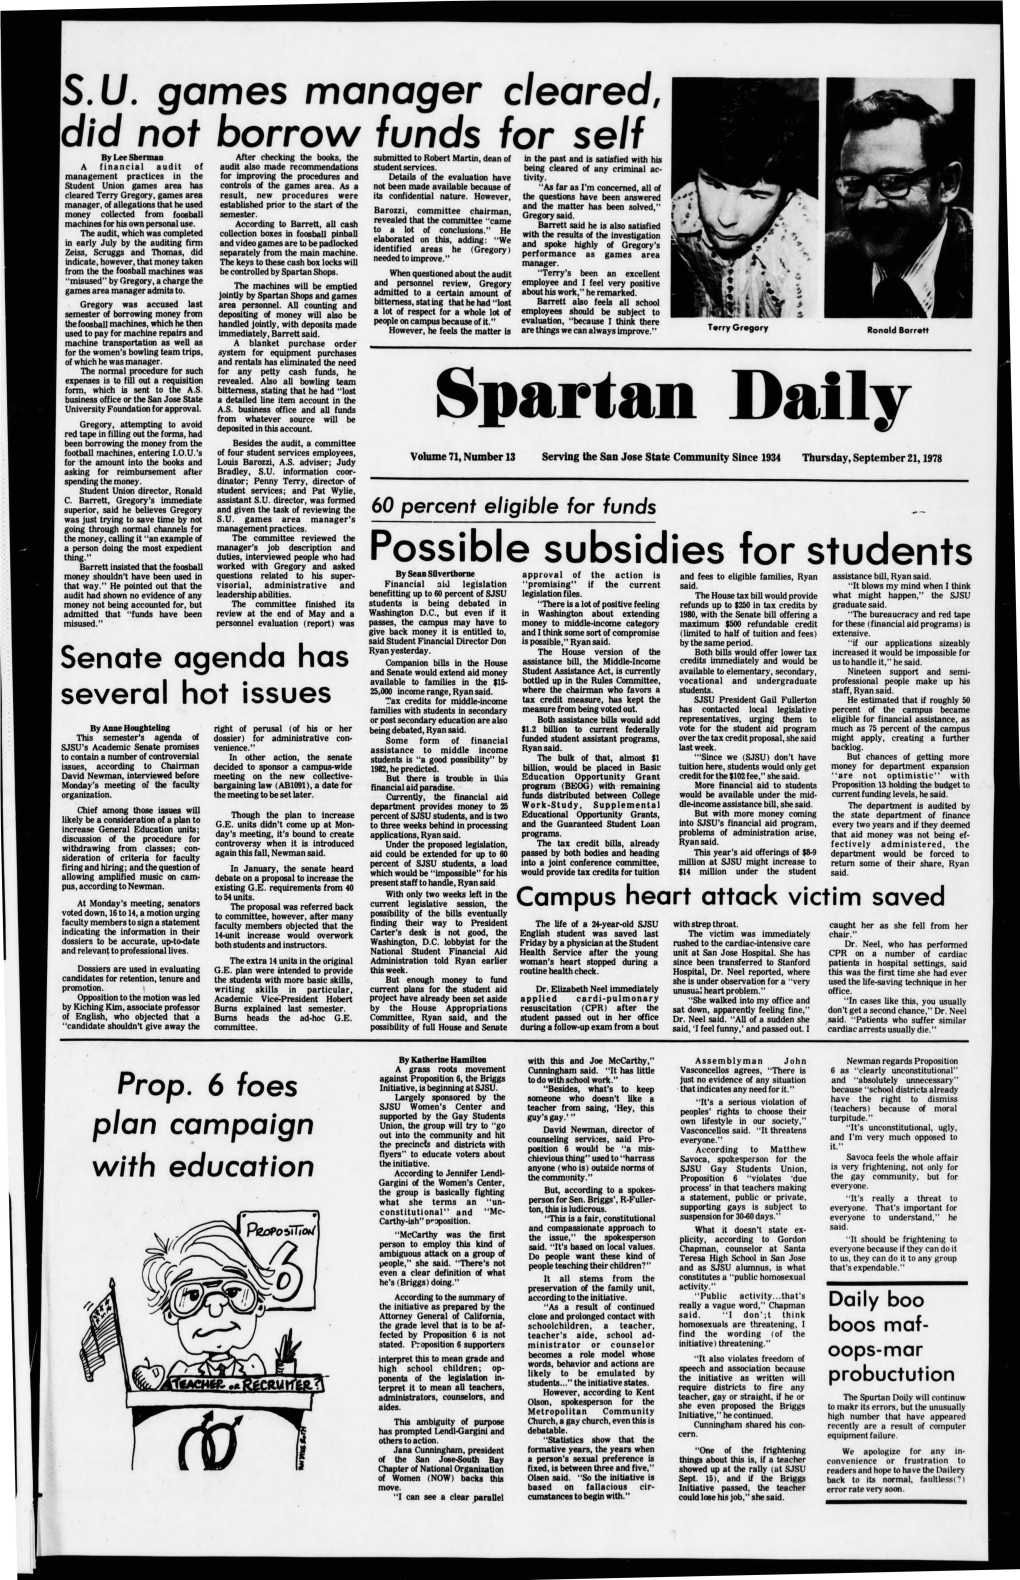 Spartan Daily on Sept